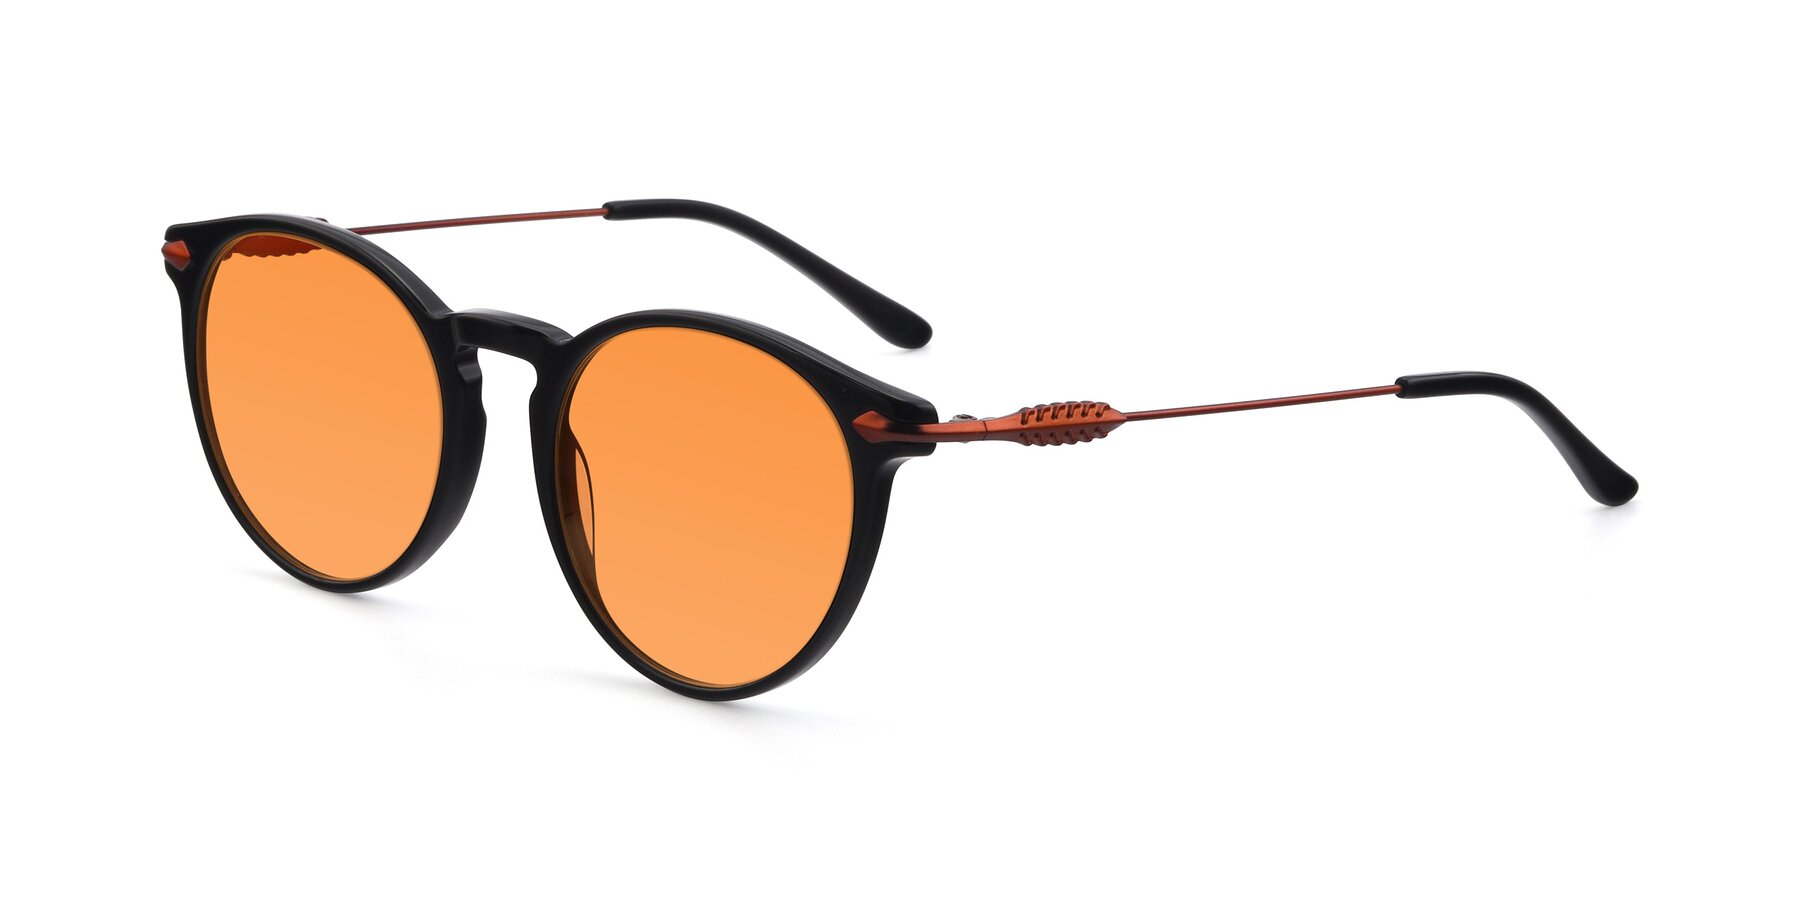 Angle of 17660 in Black with Orange Tinted Lenses